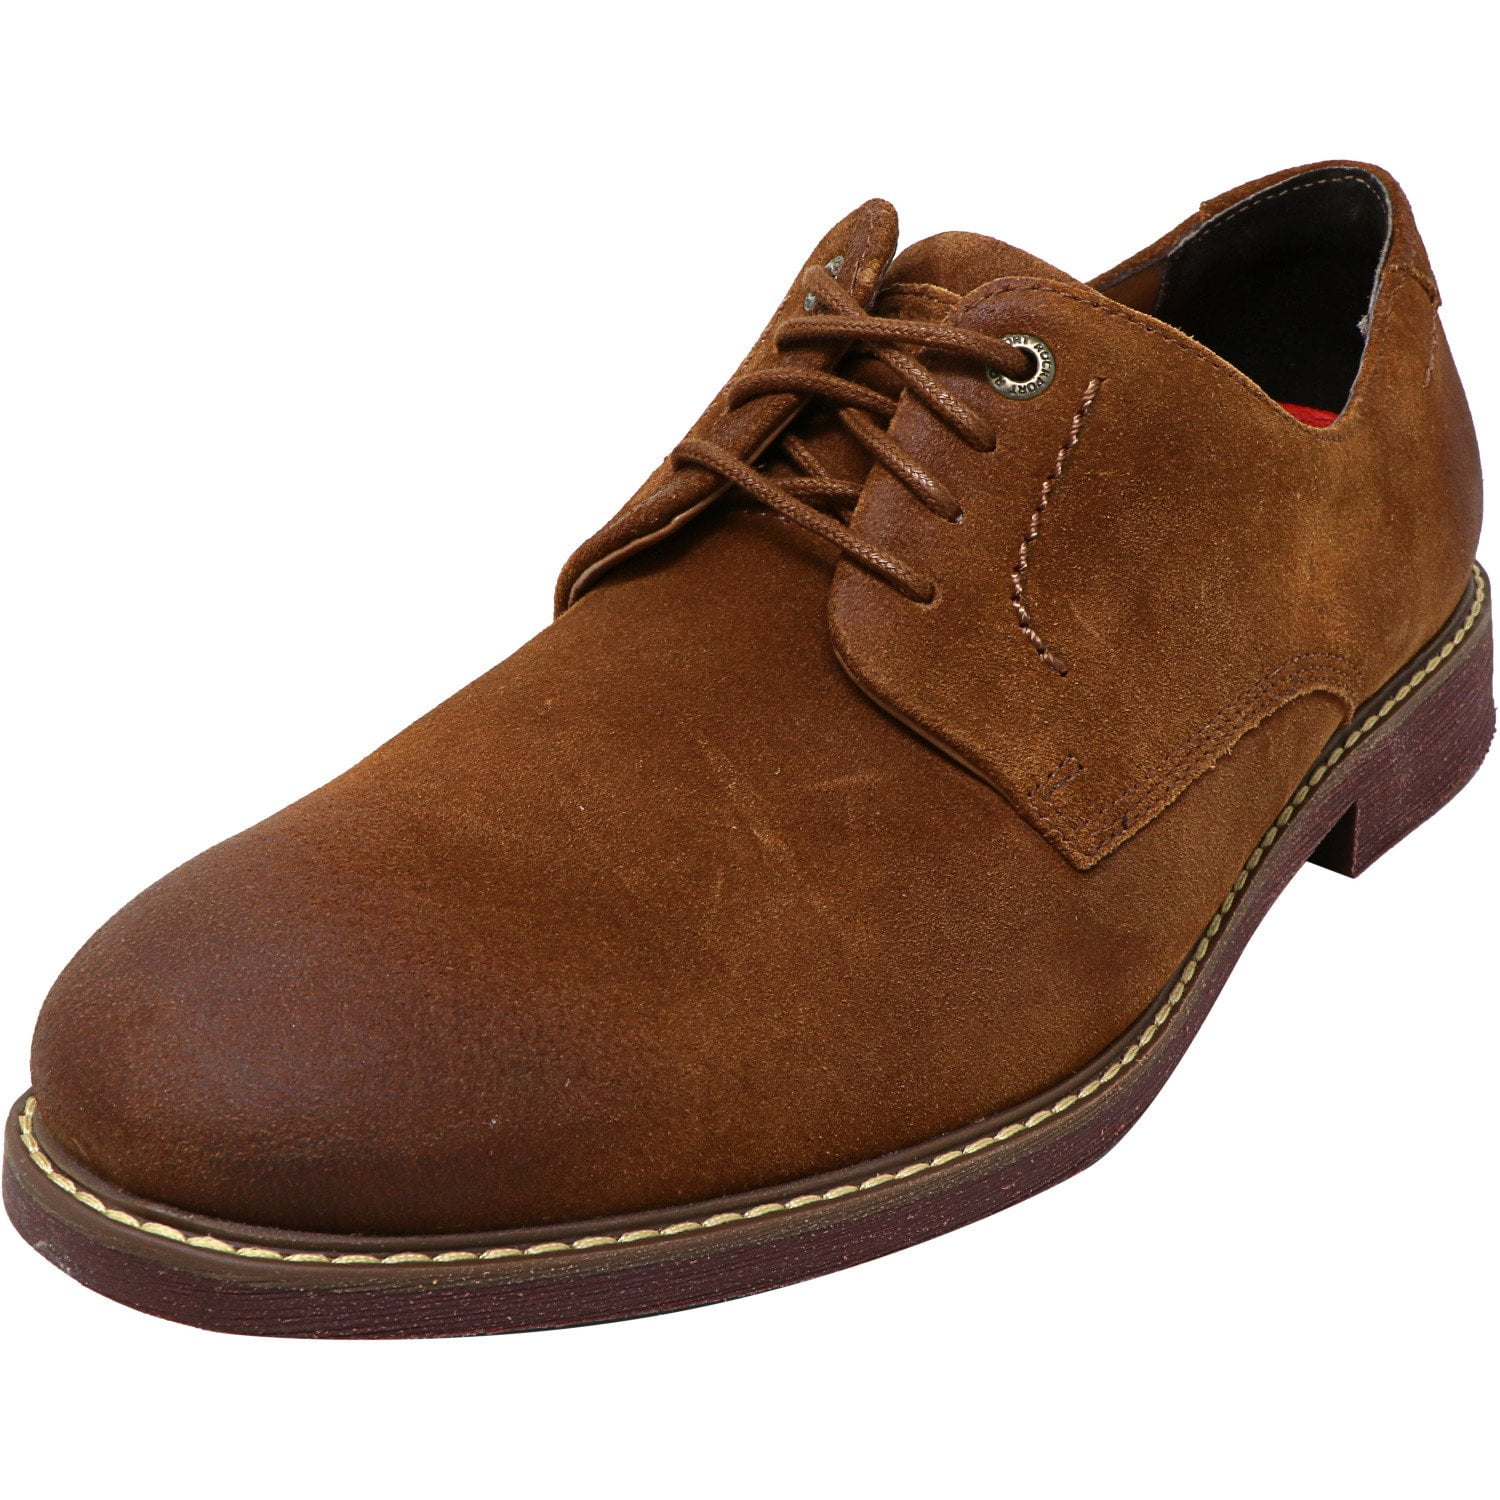 suede rockport shoes